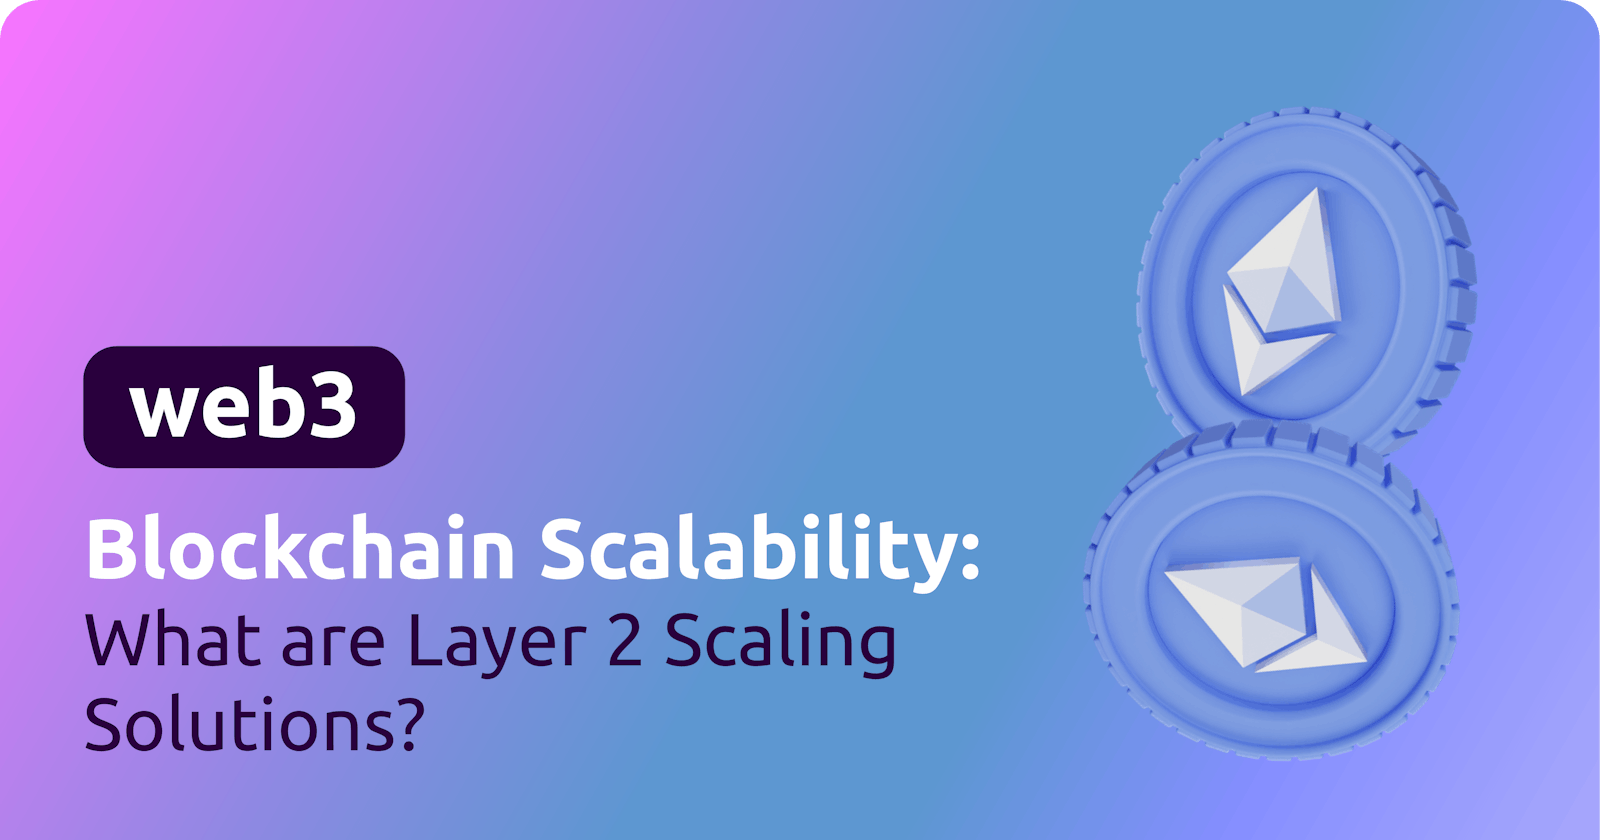 Blockchain Scalability: What are Layer 2 Scaling Solutions